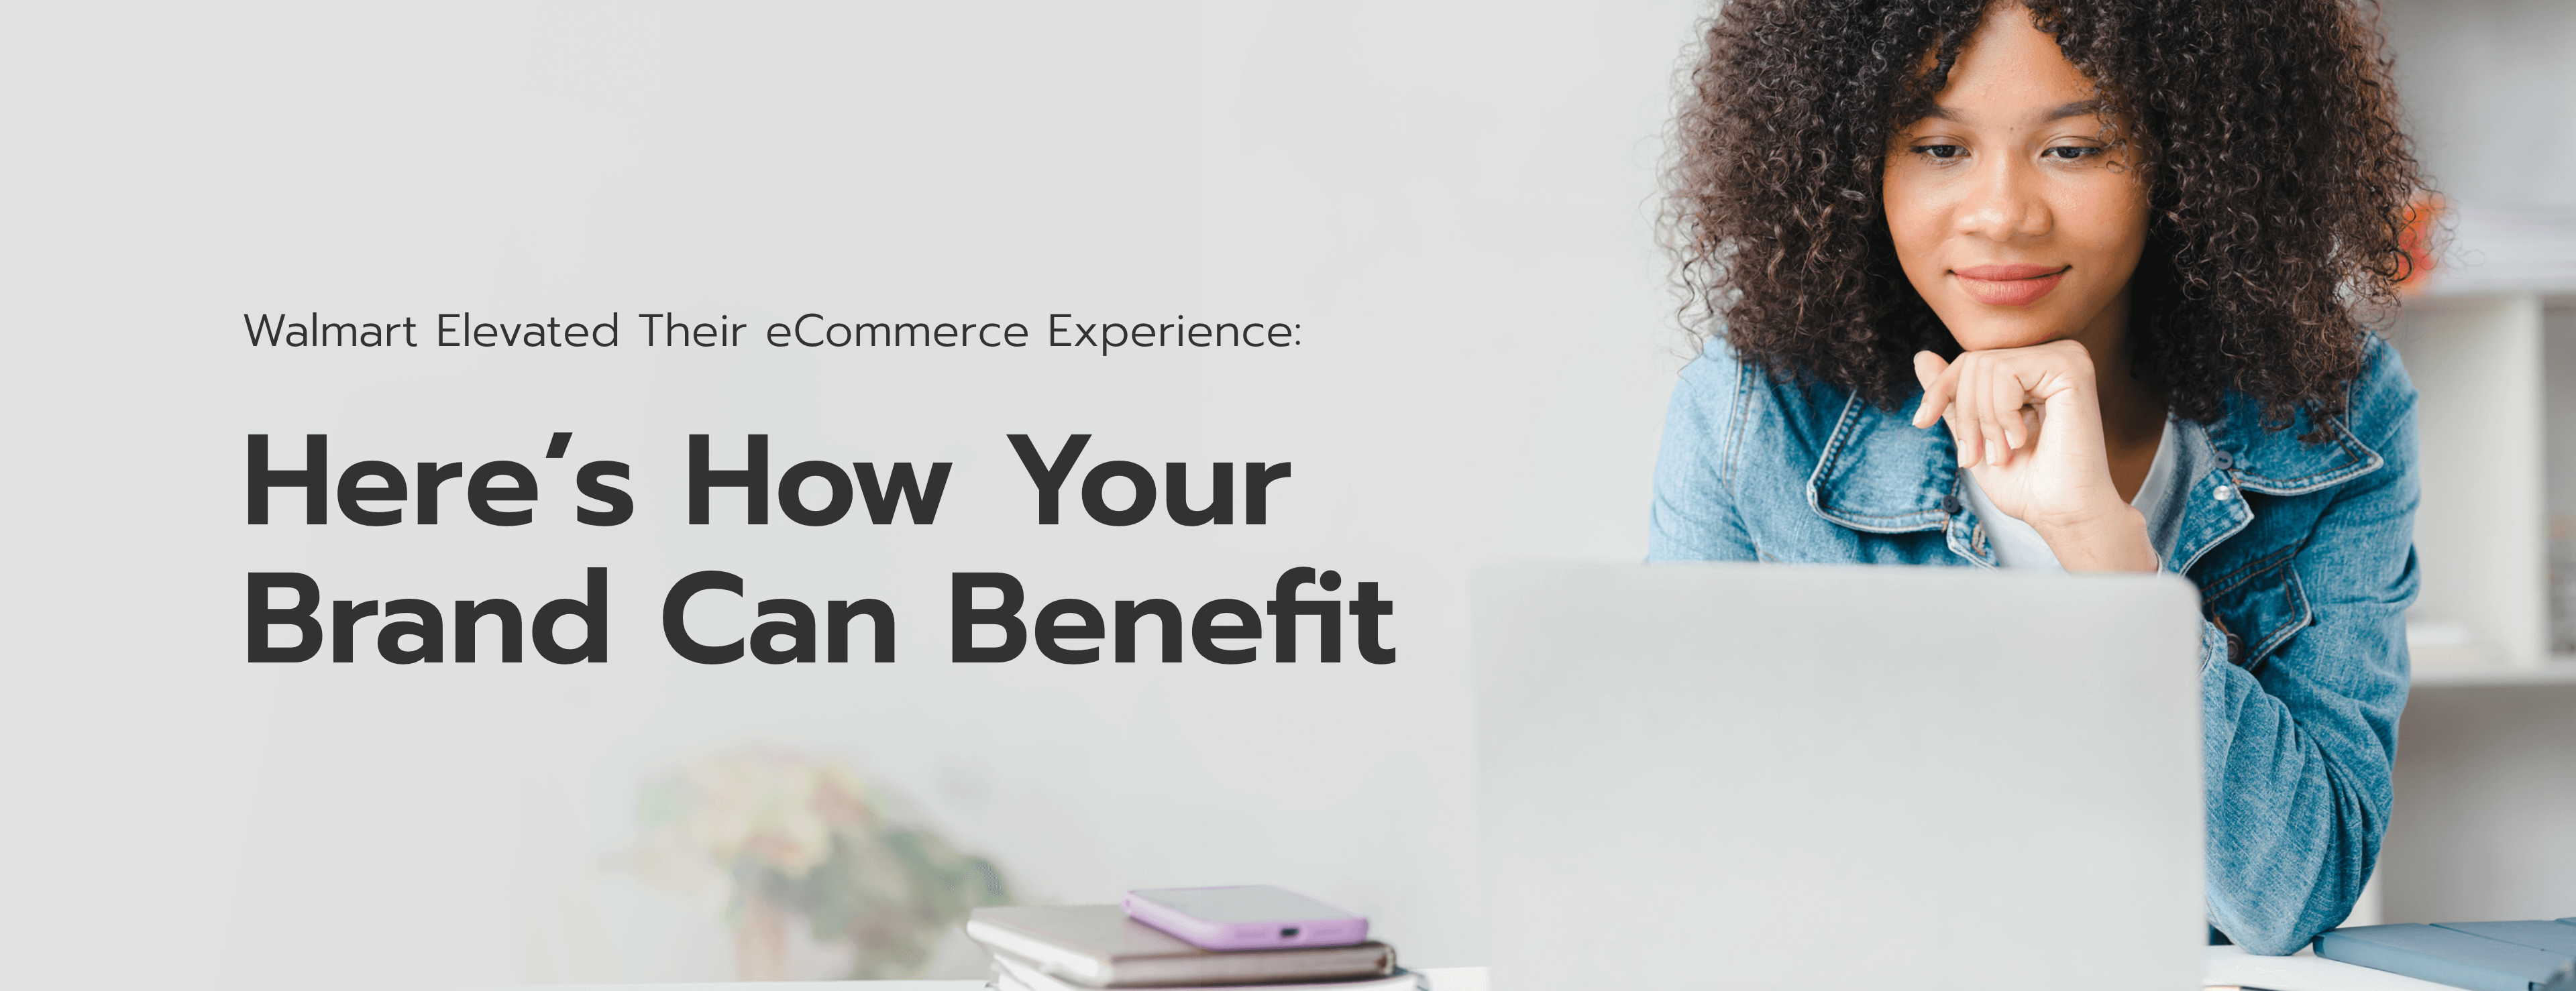 Walmart Elevated Their eCommerce Experience: Here's How Your Brand Can Benefit